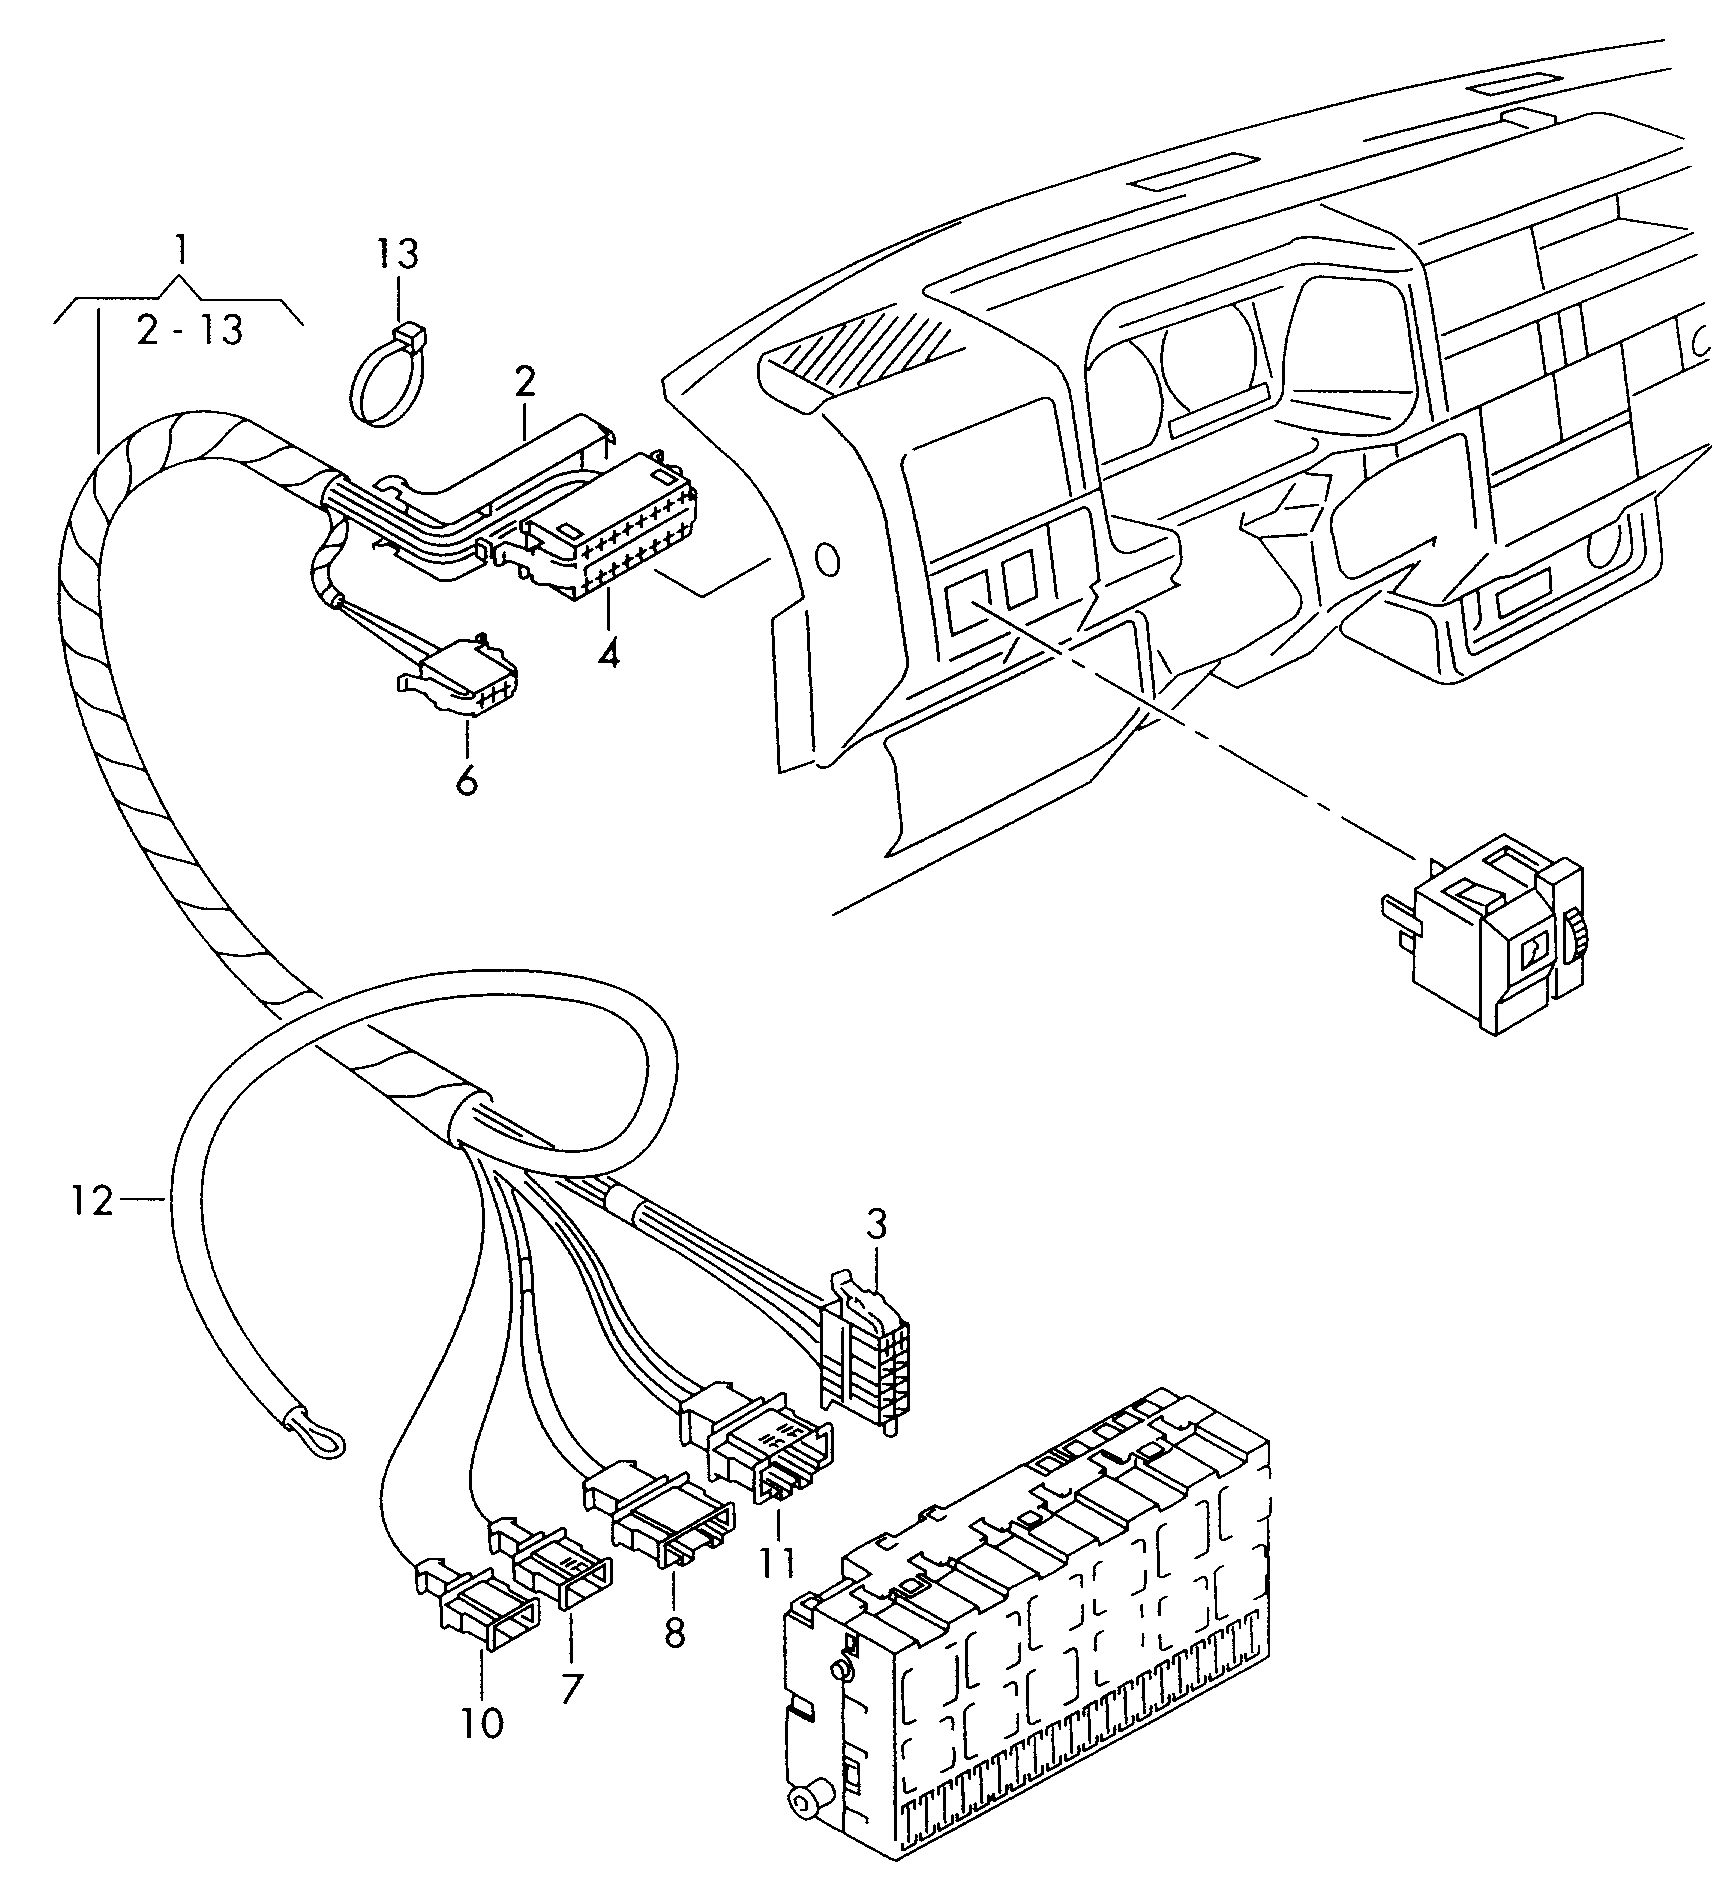 Individual parts  - Transporter syncro - trsy